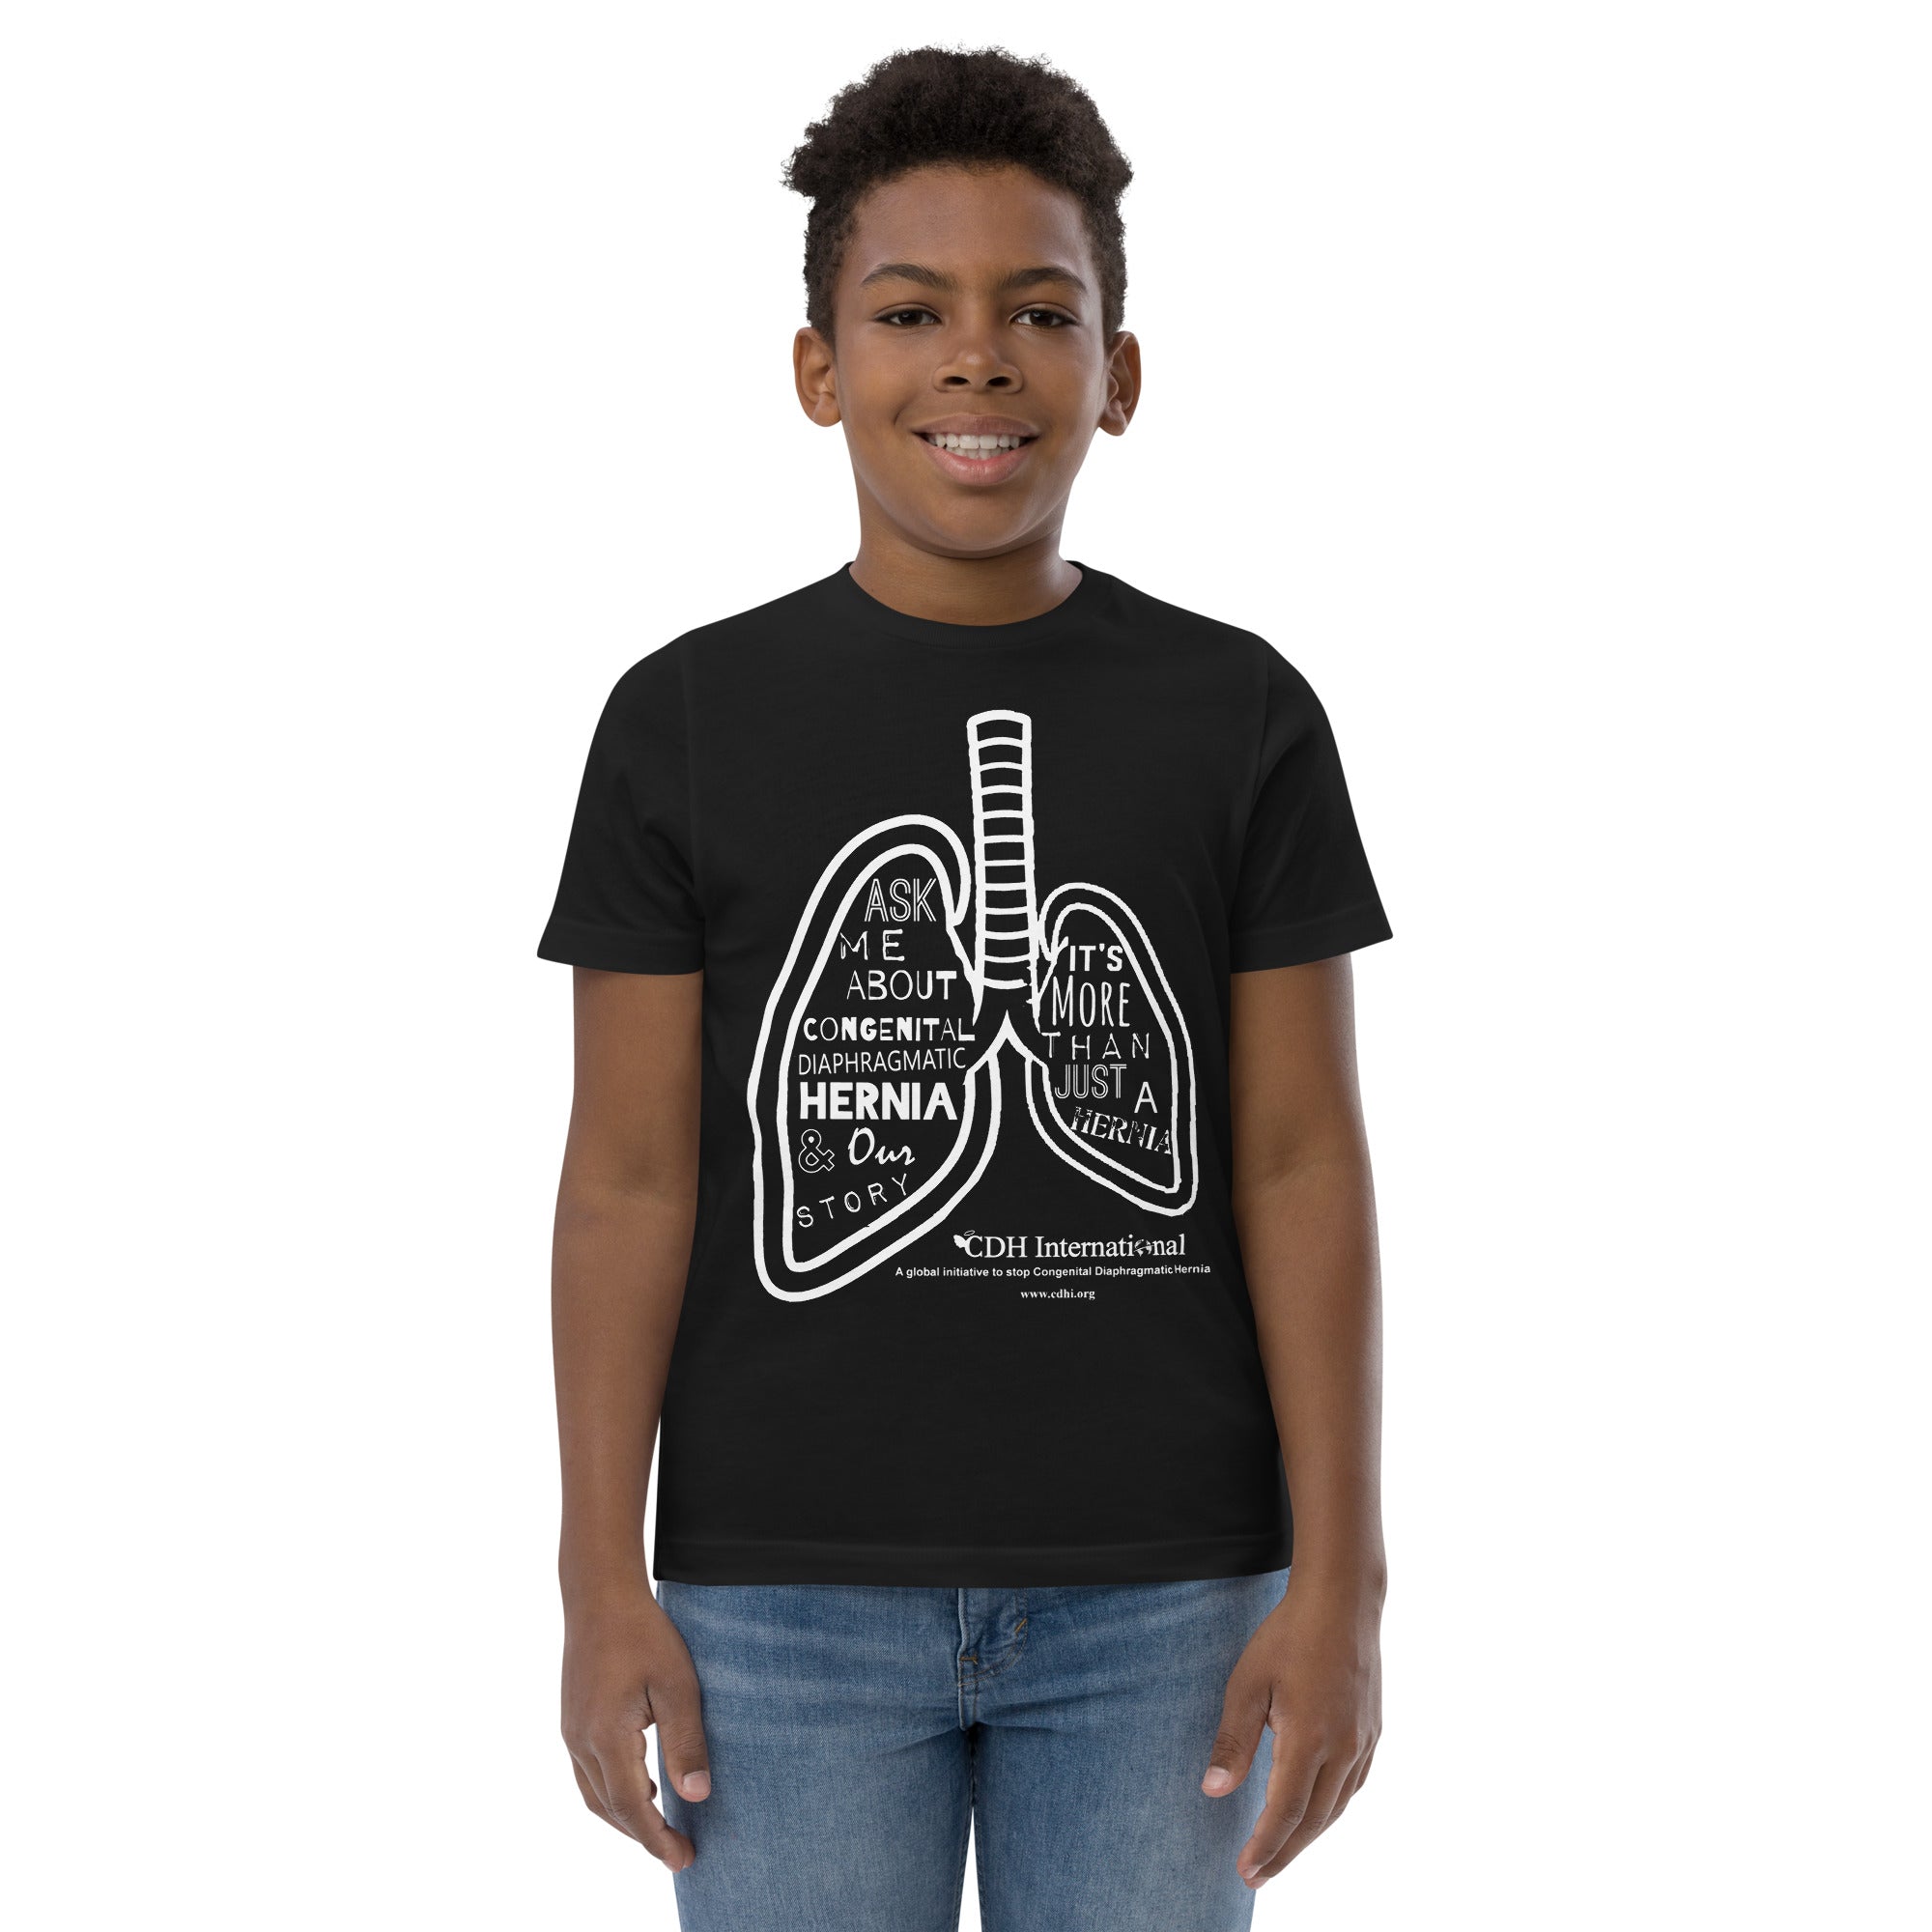 CDH Lungs Youth jersey t-shirt - $5 off this week only!